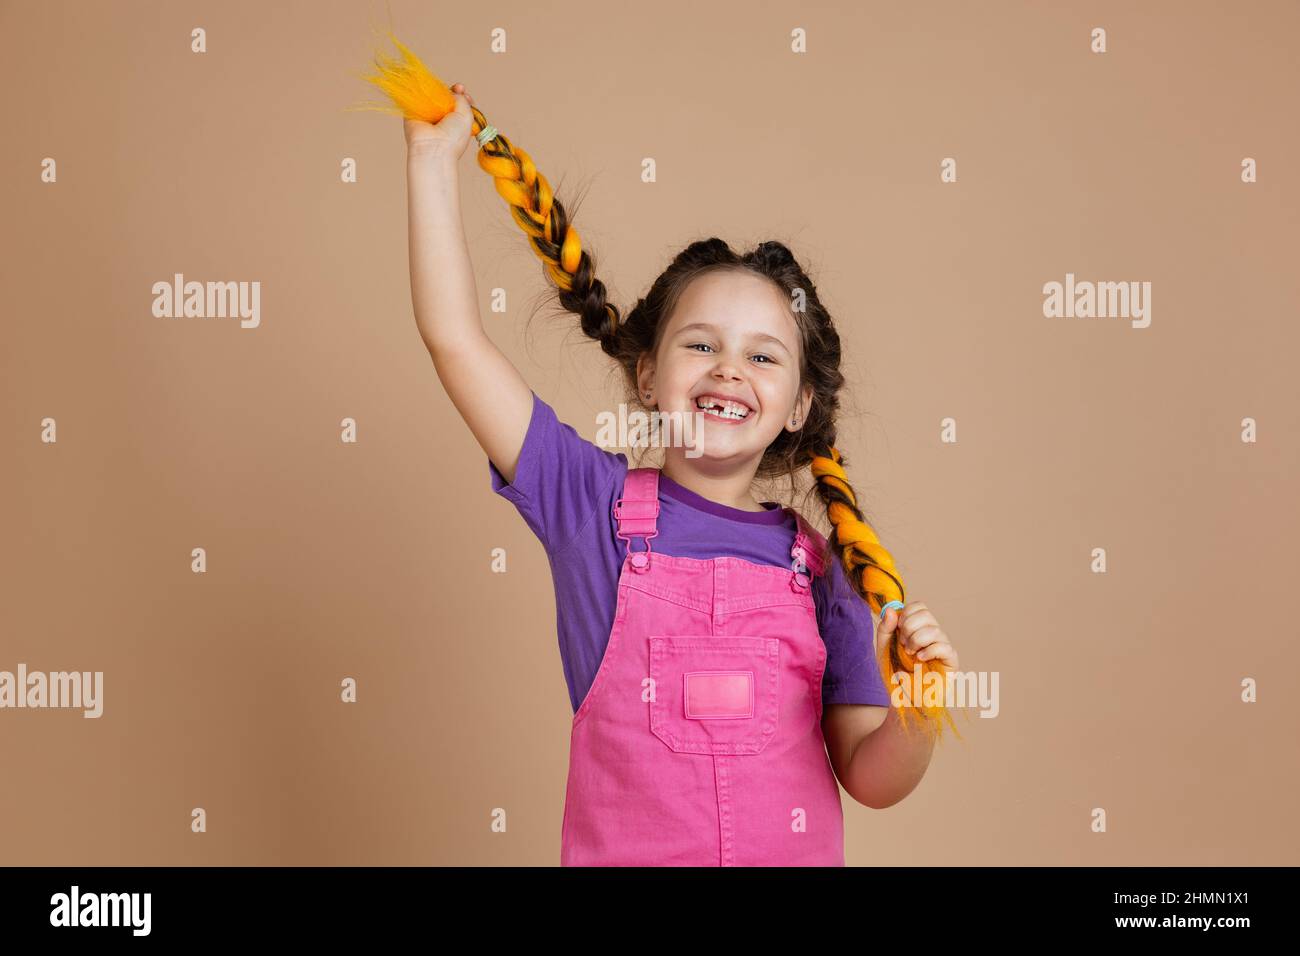 Joyful excited young girl playing with yellow kanekalon braids, having big smile with missing tooth looking at camera wearing pink jumpsuit and purple Stock Photo